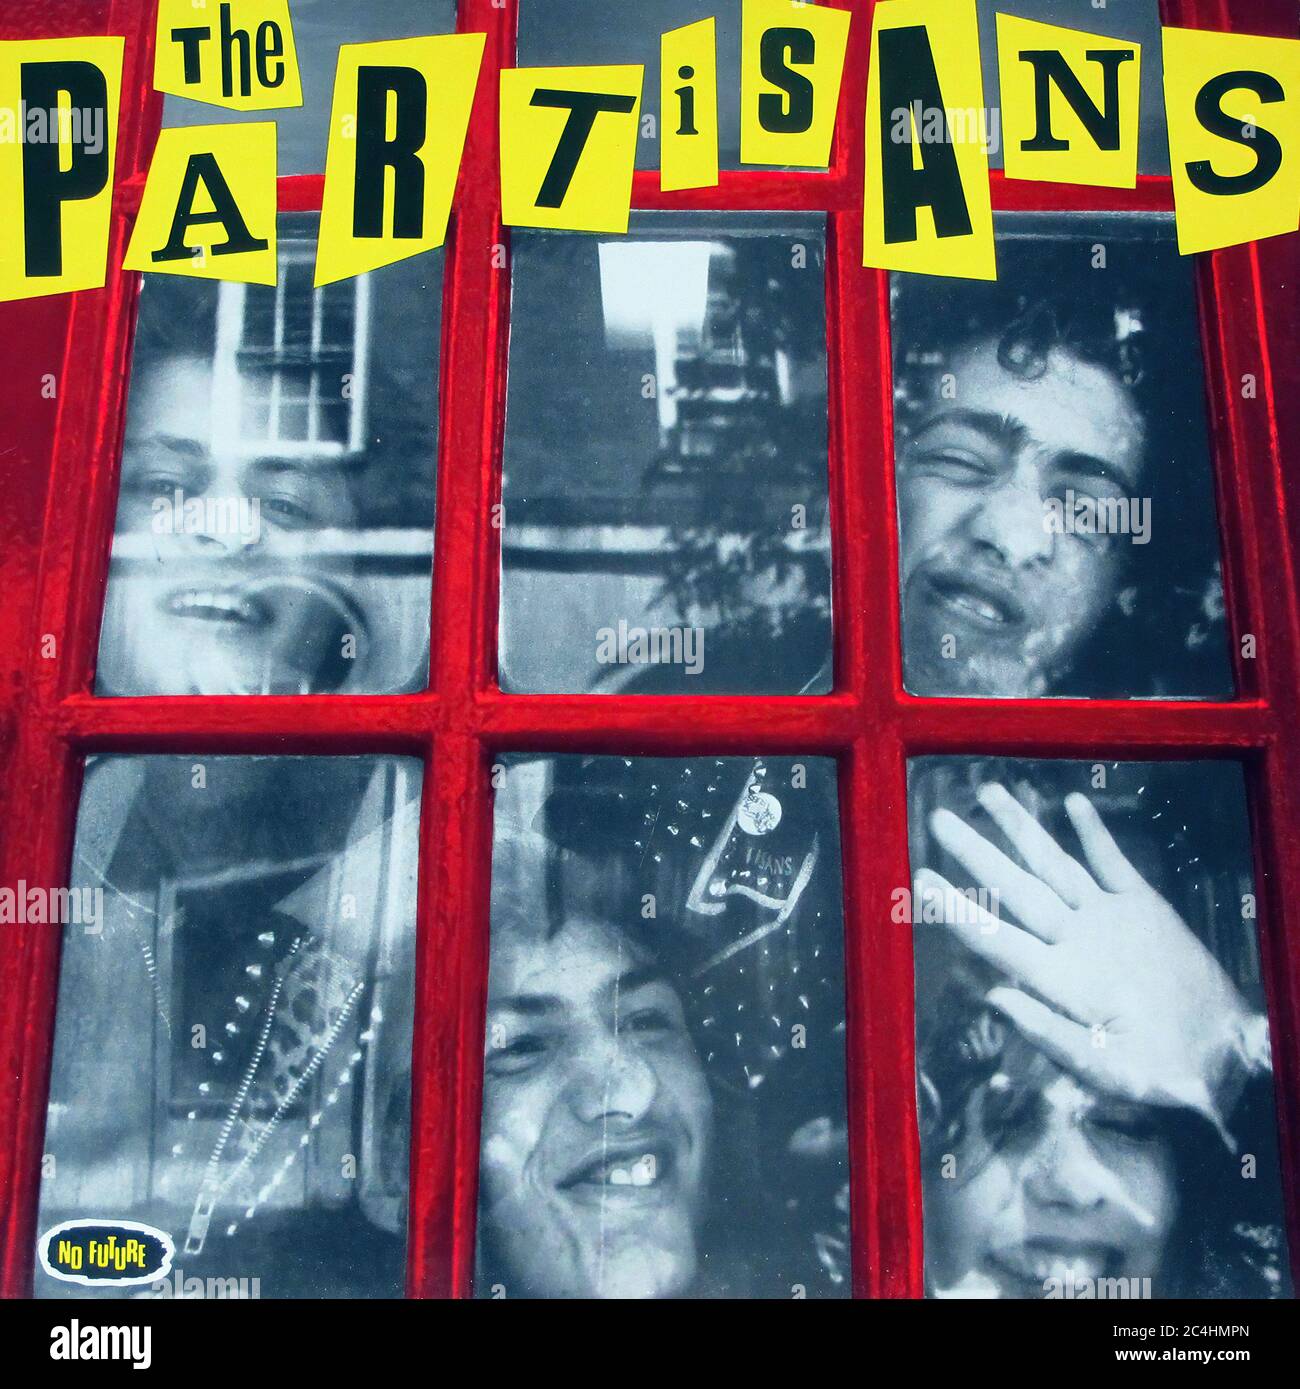 The Partisans St Self Titled Orig No Future 12'' Lp Vinyl - Vintage Record Cover Stock Photo